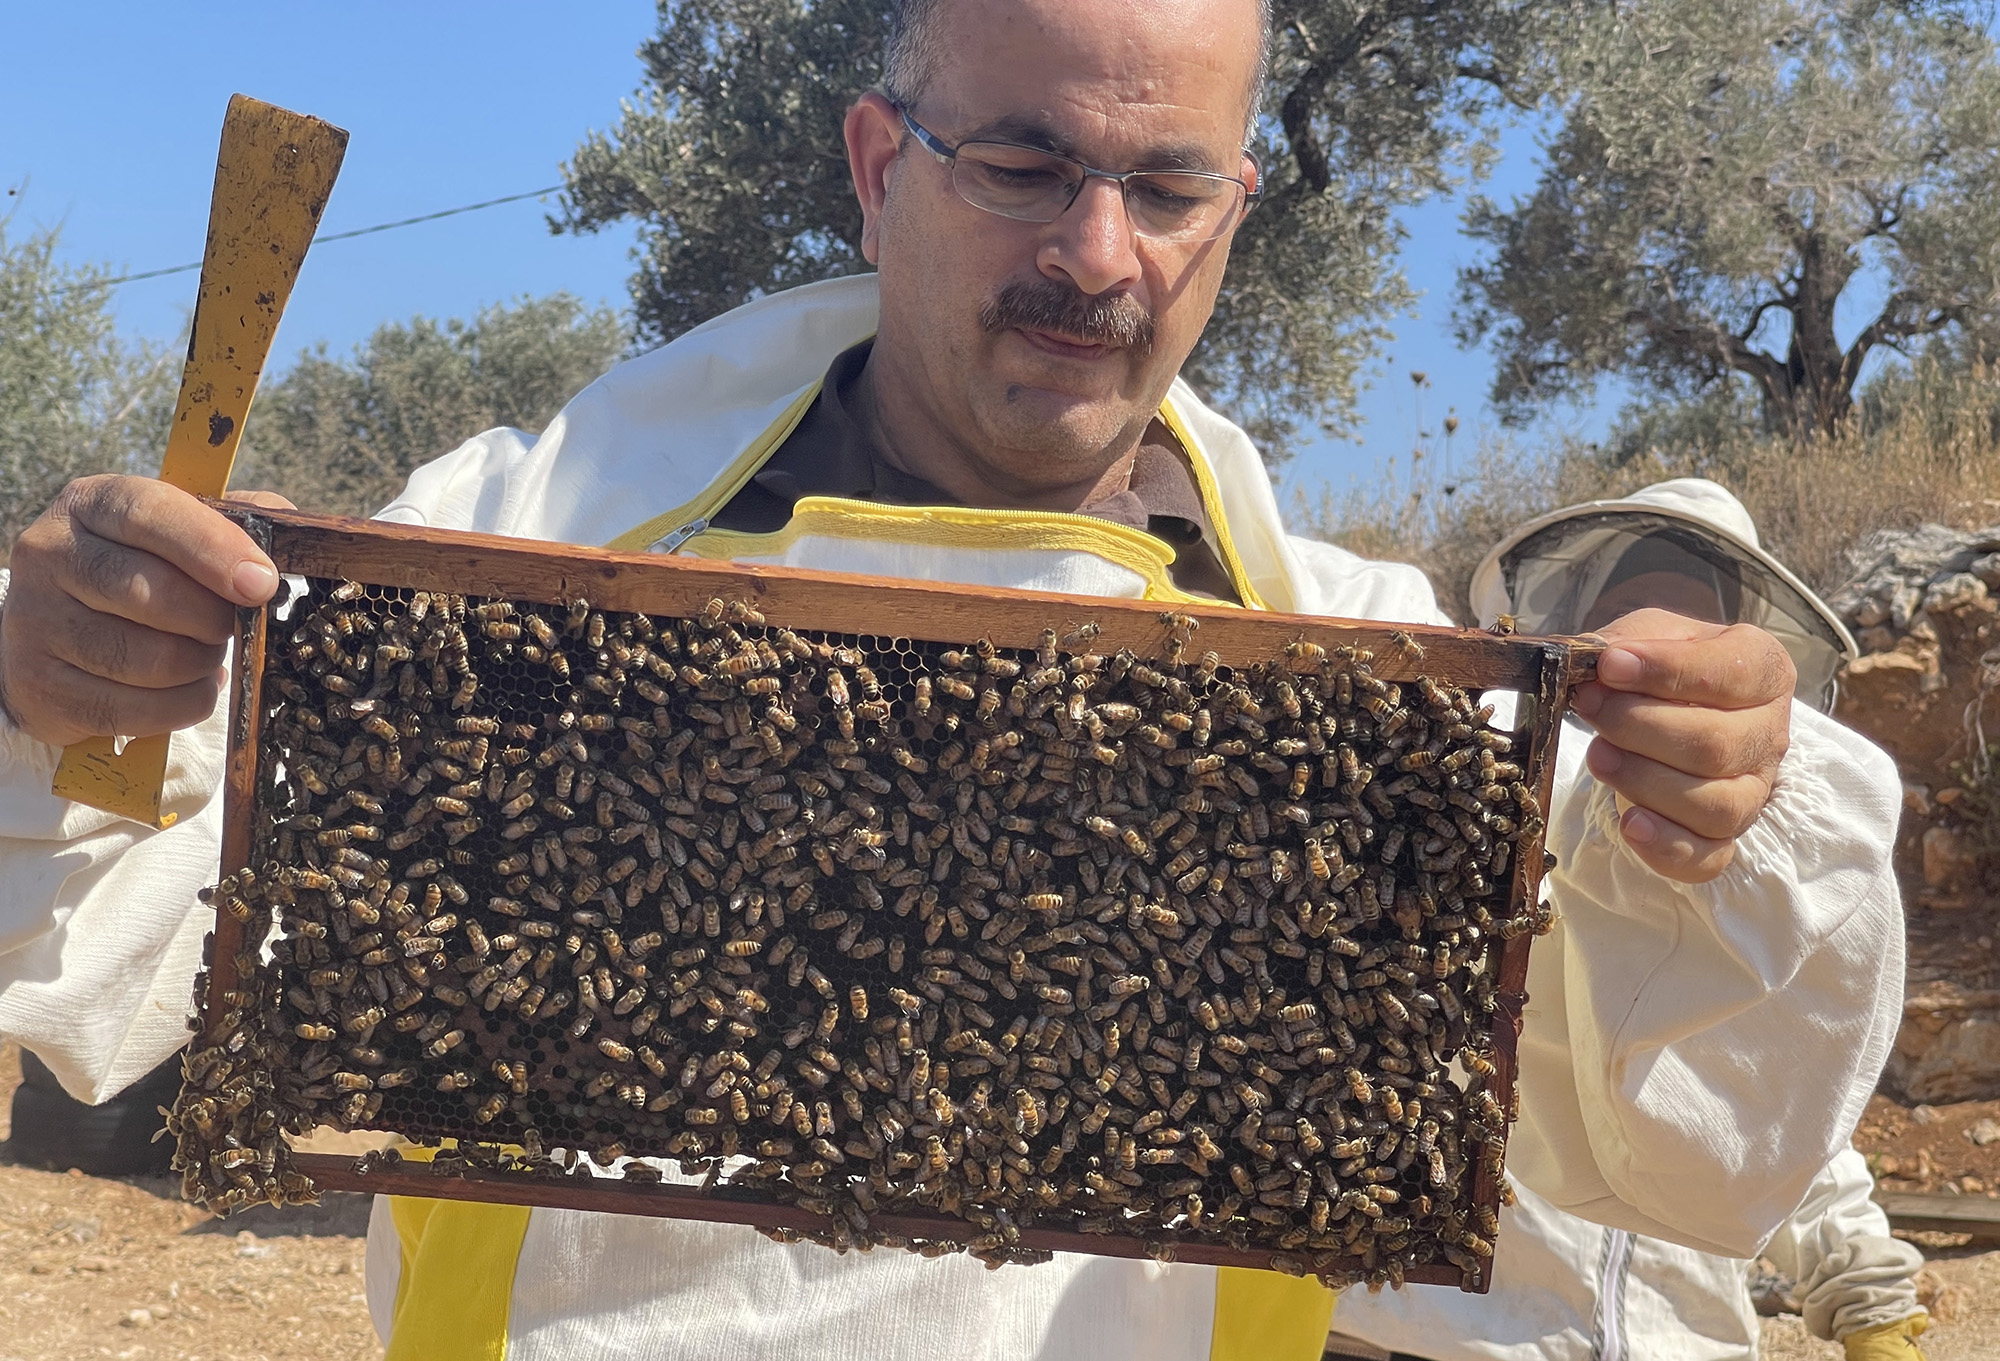 Anera's Palestine agricultural programs manager Naser Qadous works with Women Can participants to help make their projects a success. Here he is holding up a frame covered in honey bees.